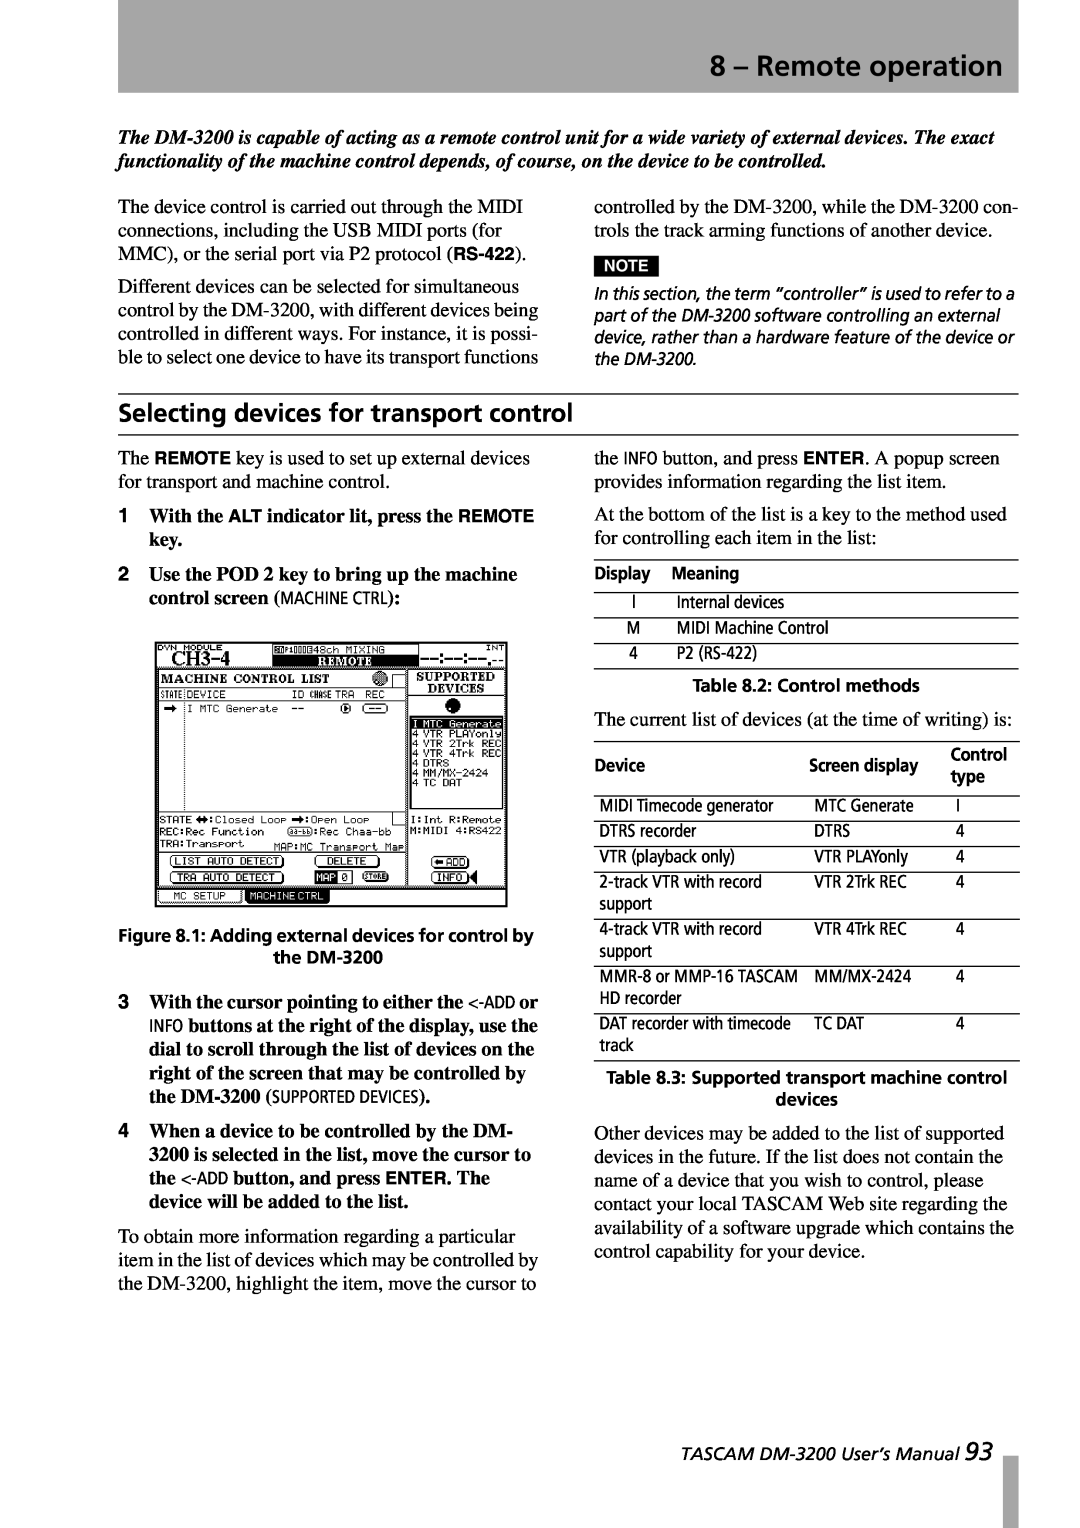 Tascam DM-3200 owner manual 8 – Remote operation, Selecting devices for transport control 